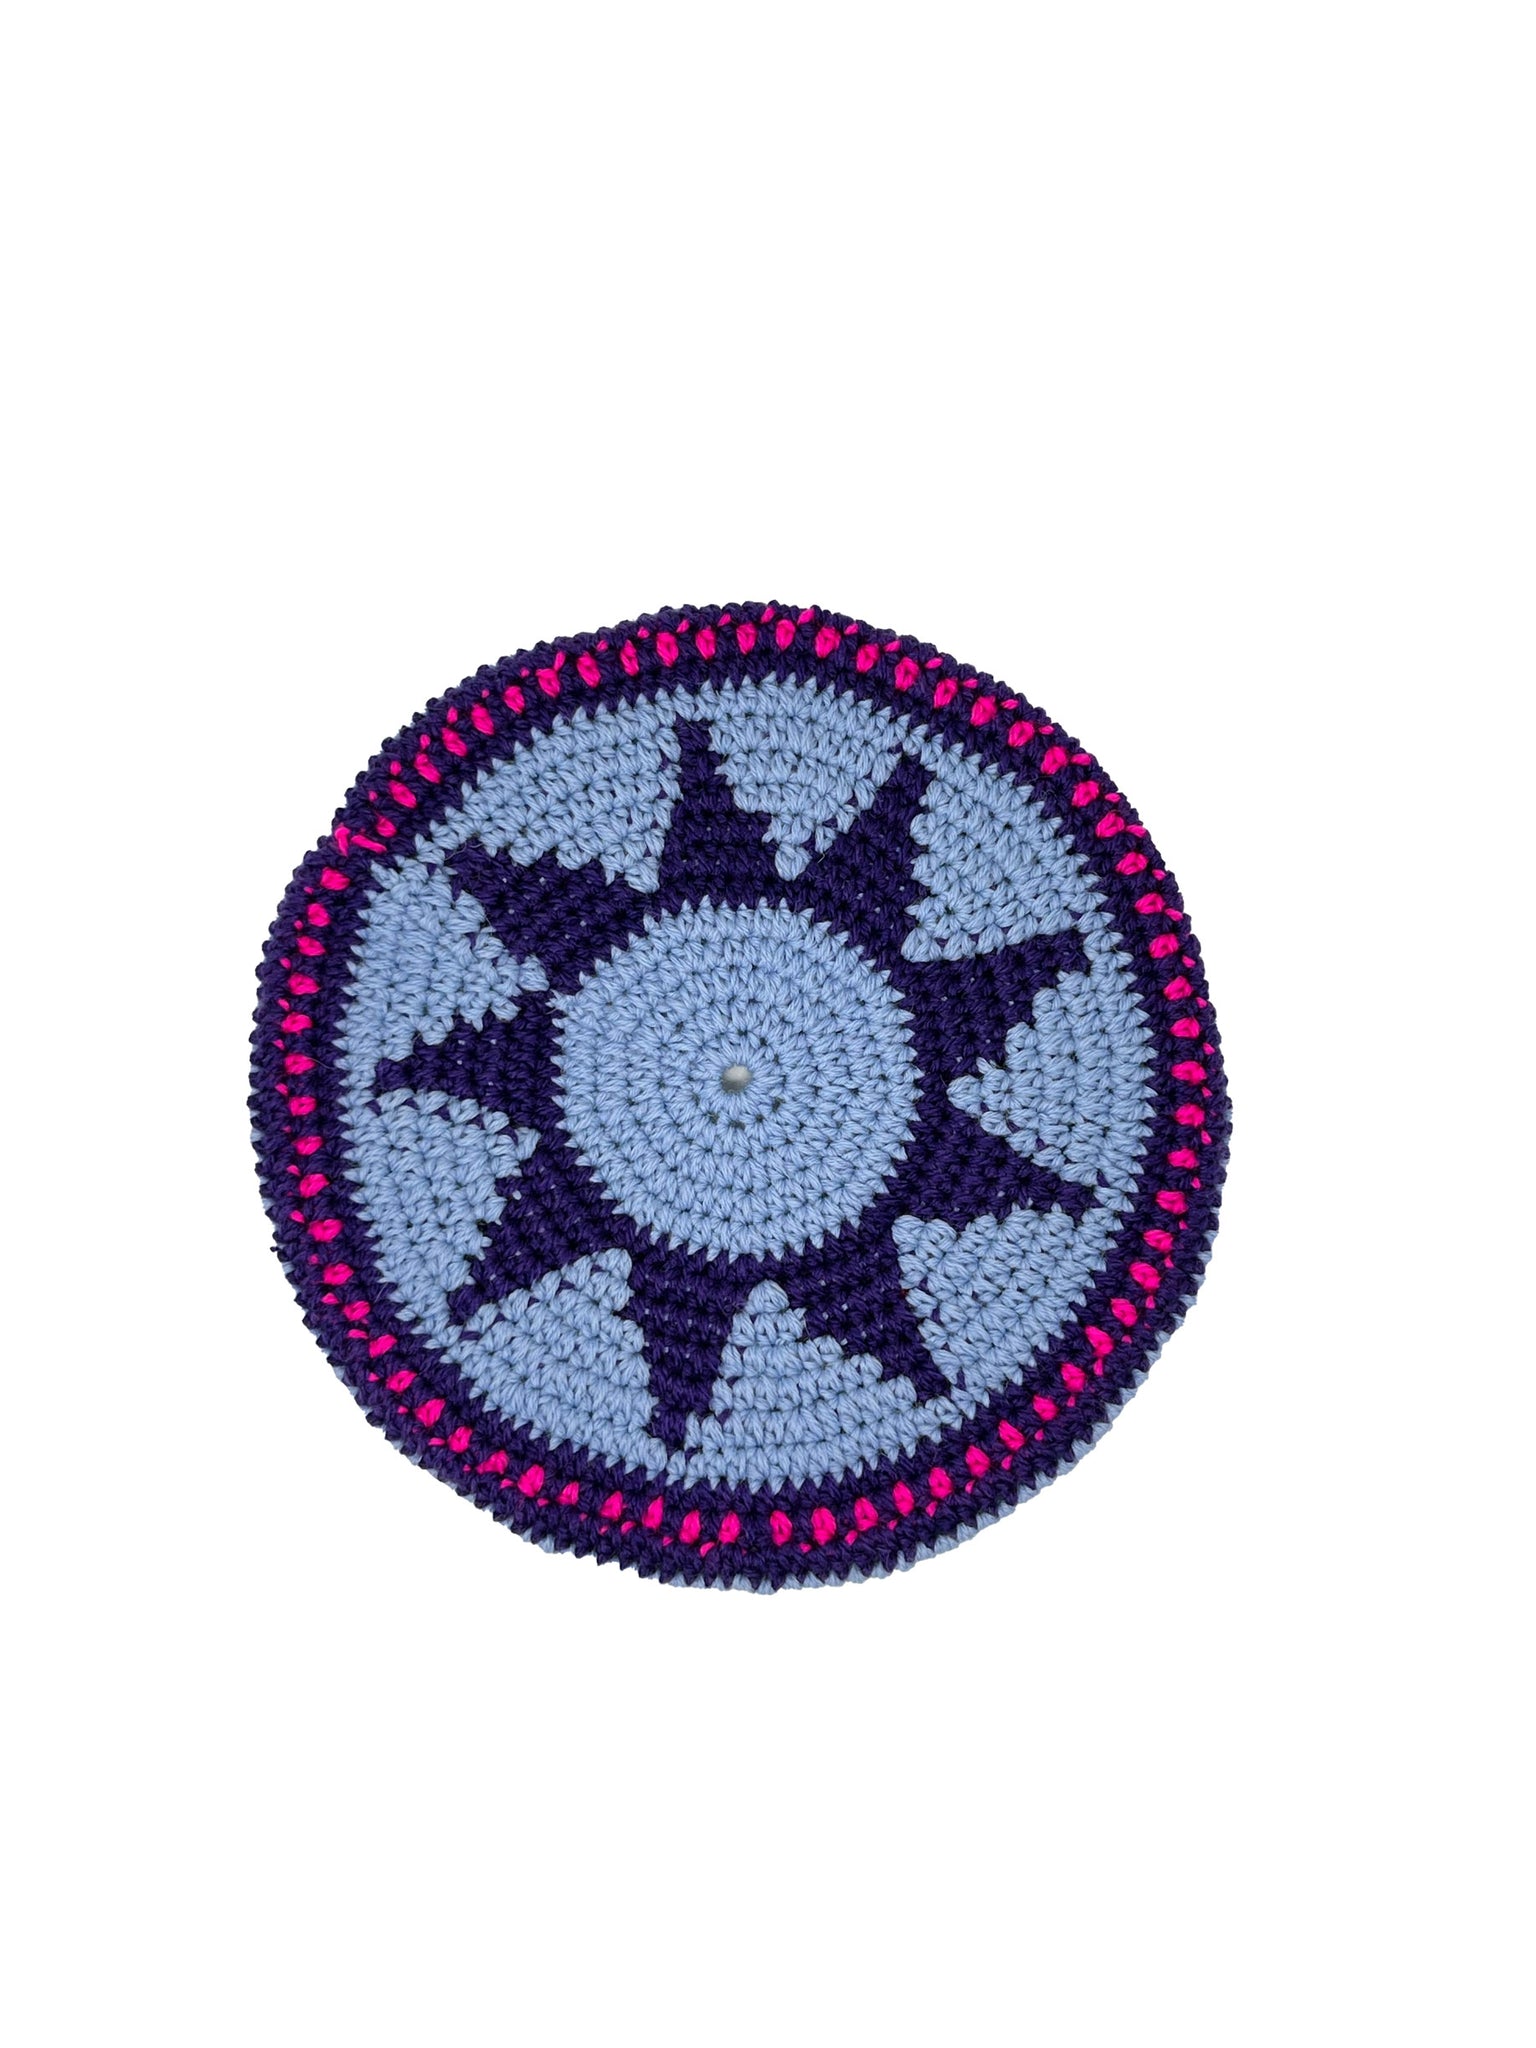 Light blue violet and fuxia wool crochet beret